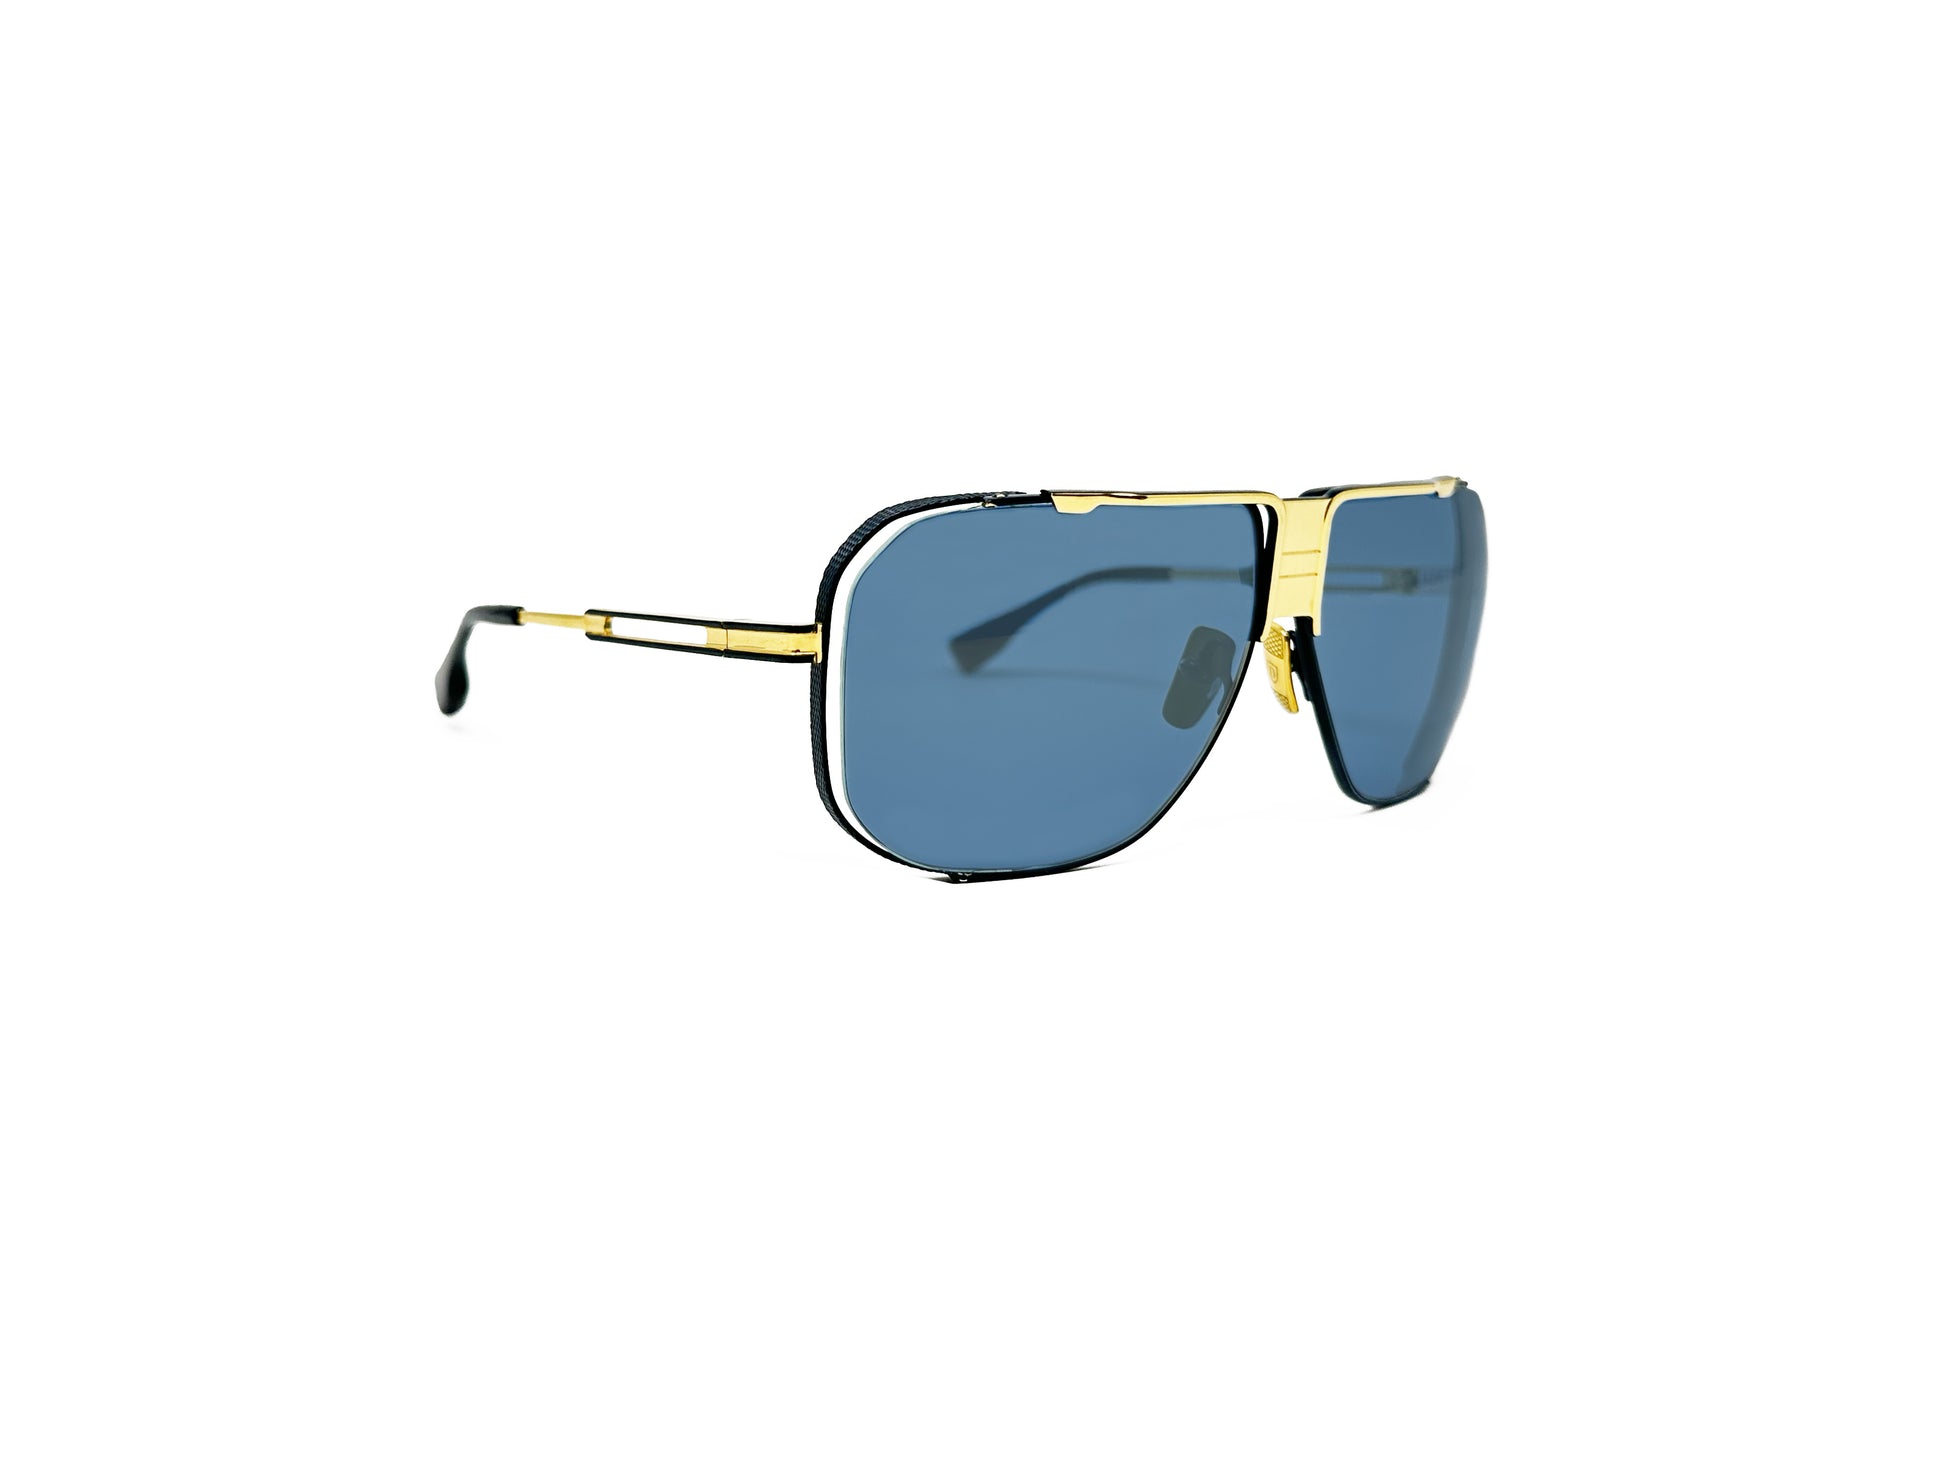 Dita large angled, aviator type sunglass with flat top. Model: Cascais. Color: Gold metal with blue lenses. Side view.